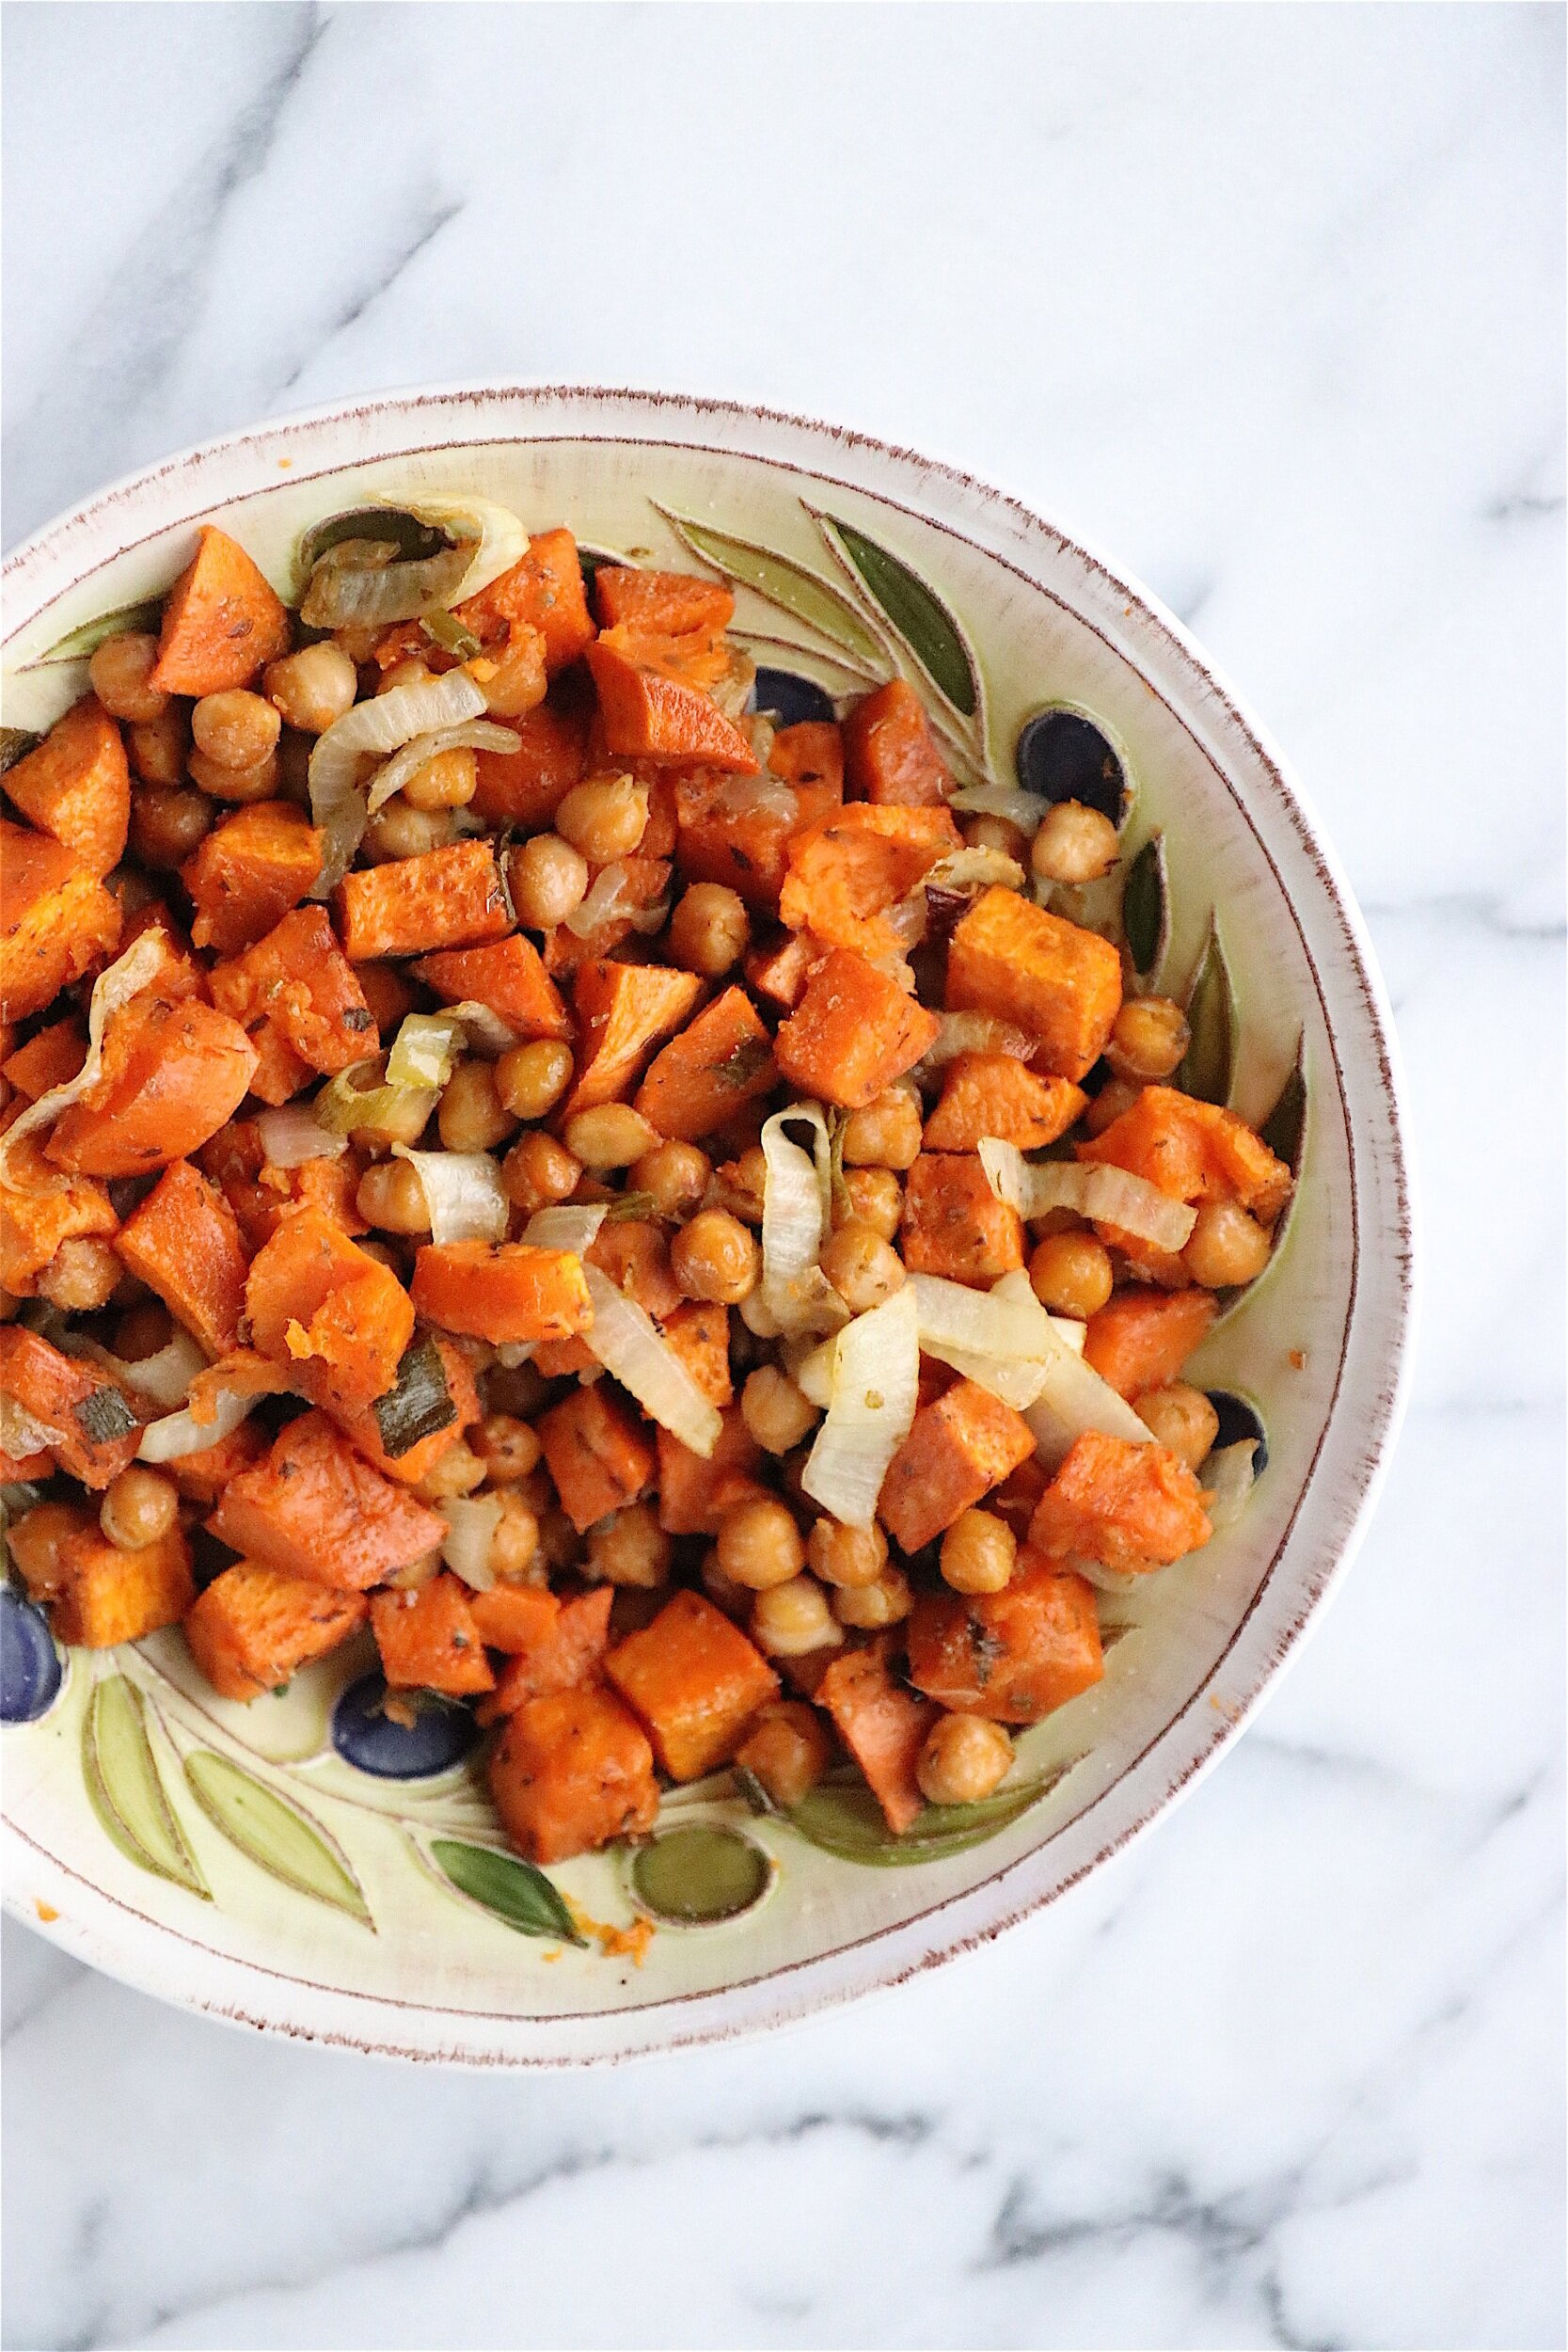 10 Unbelievably Easy Fall Recipes You Need to Try This Week - Sweet Potato Garbanzo Bak.jpg